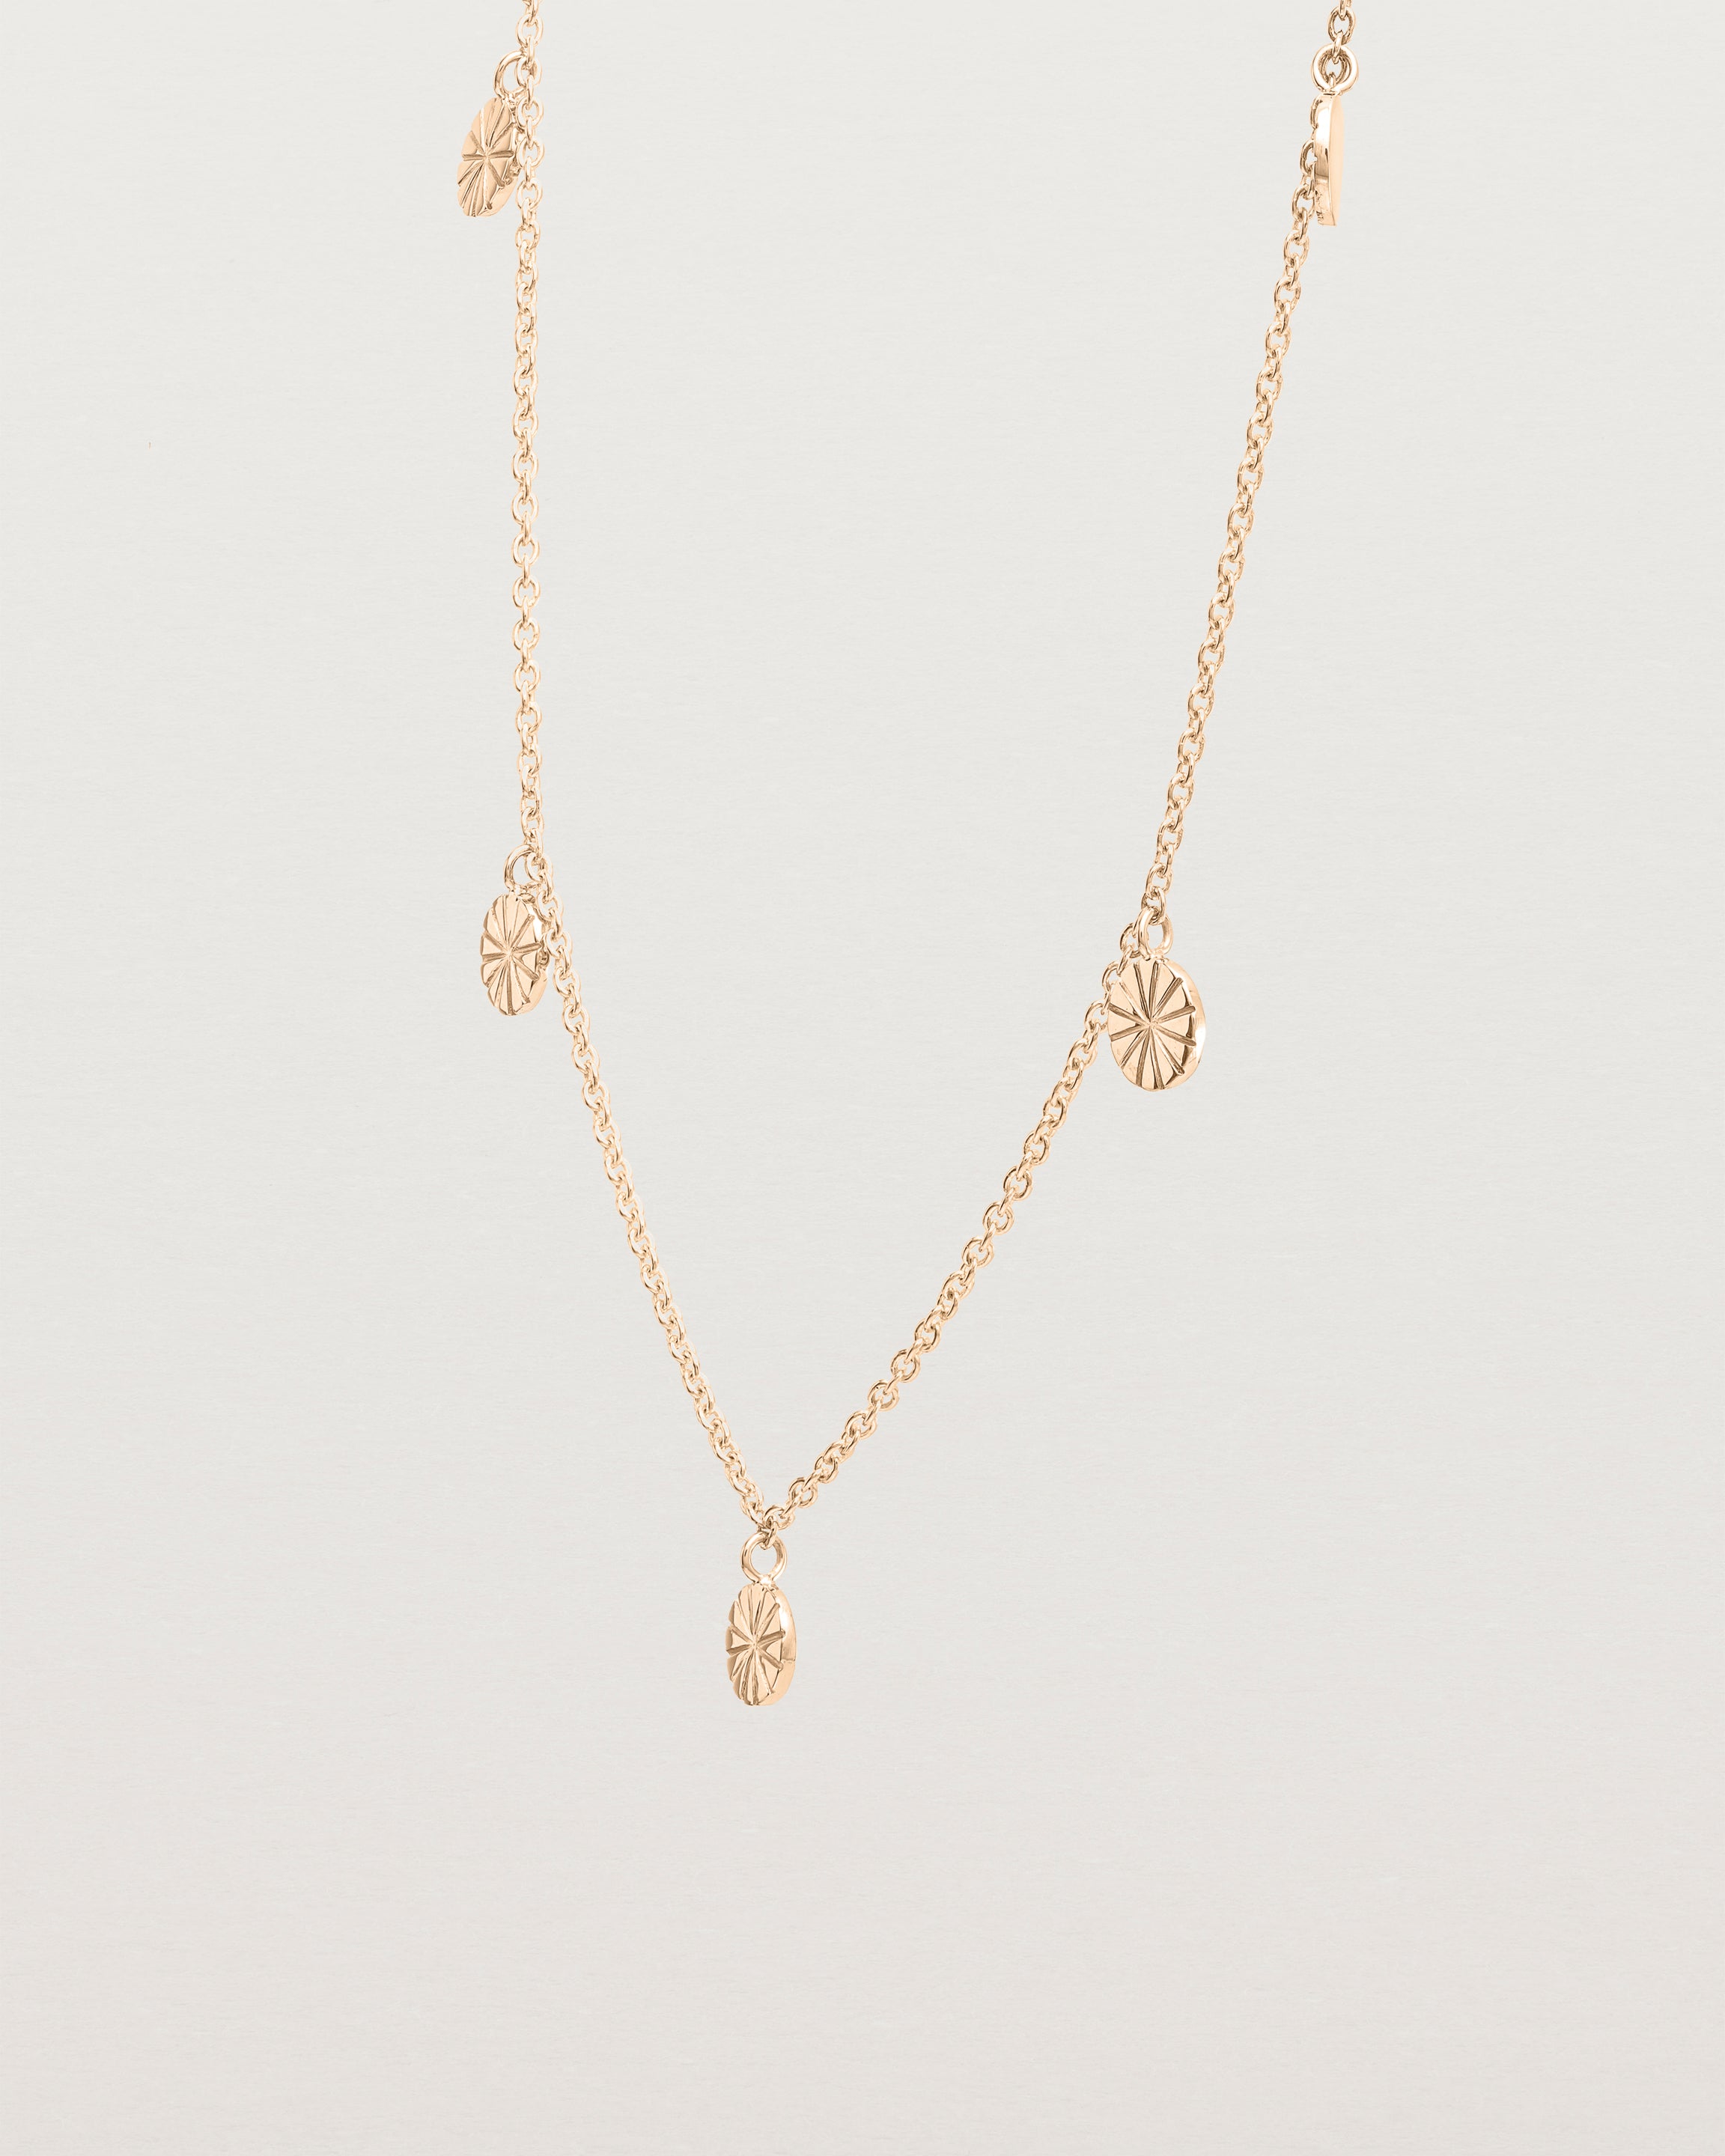 Angled view of the Jia Charm Necklace | Rose Gold.